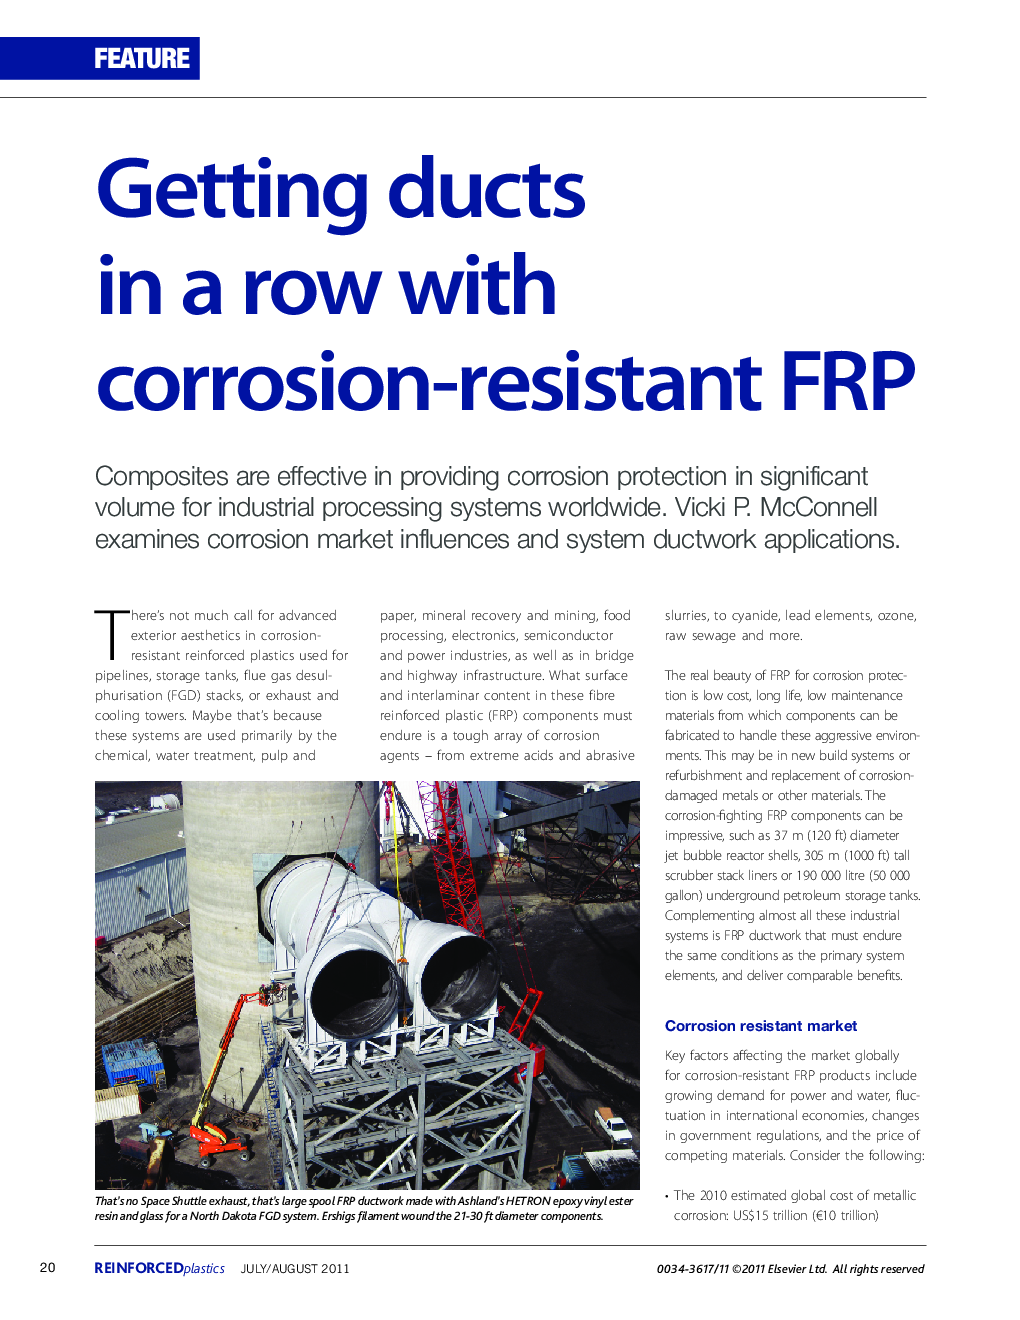 Getting ducts in a row with corrosion-resistant FRP